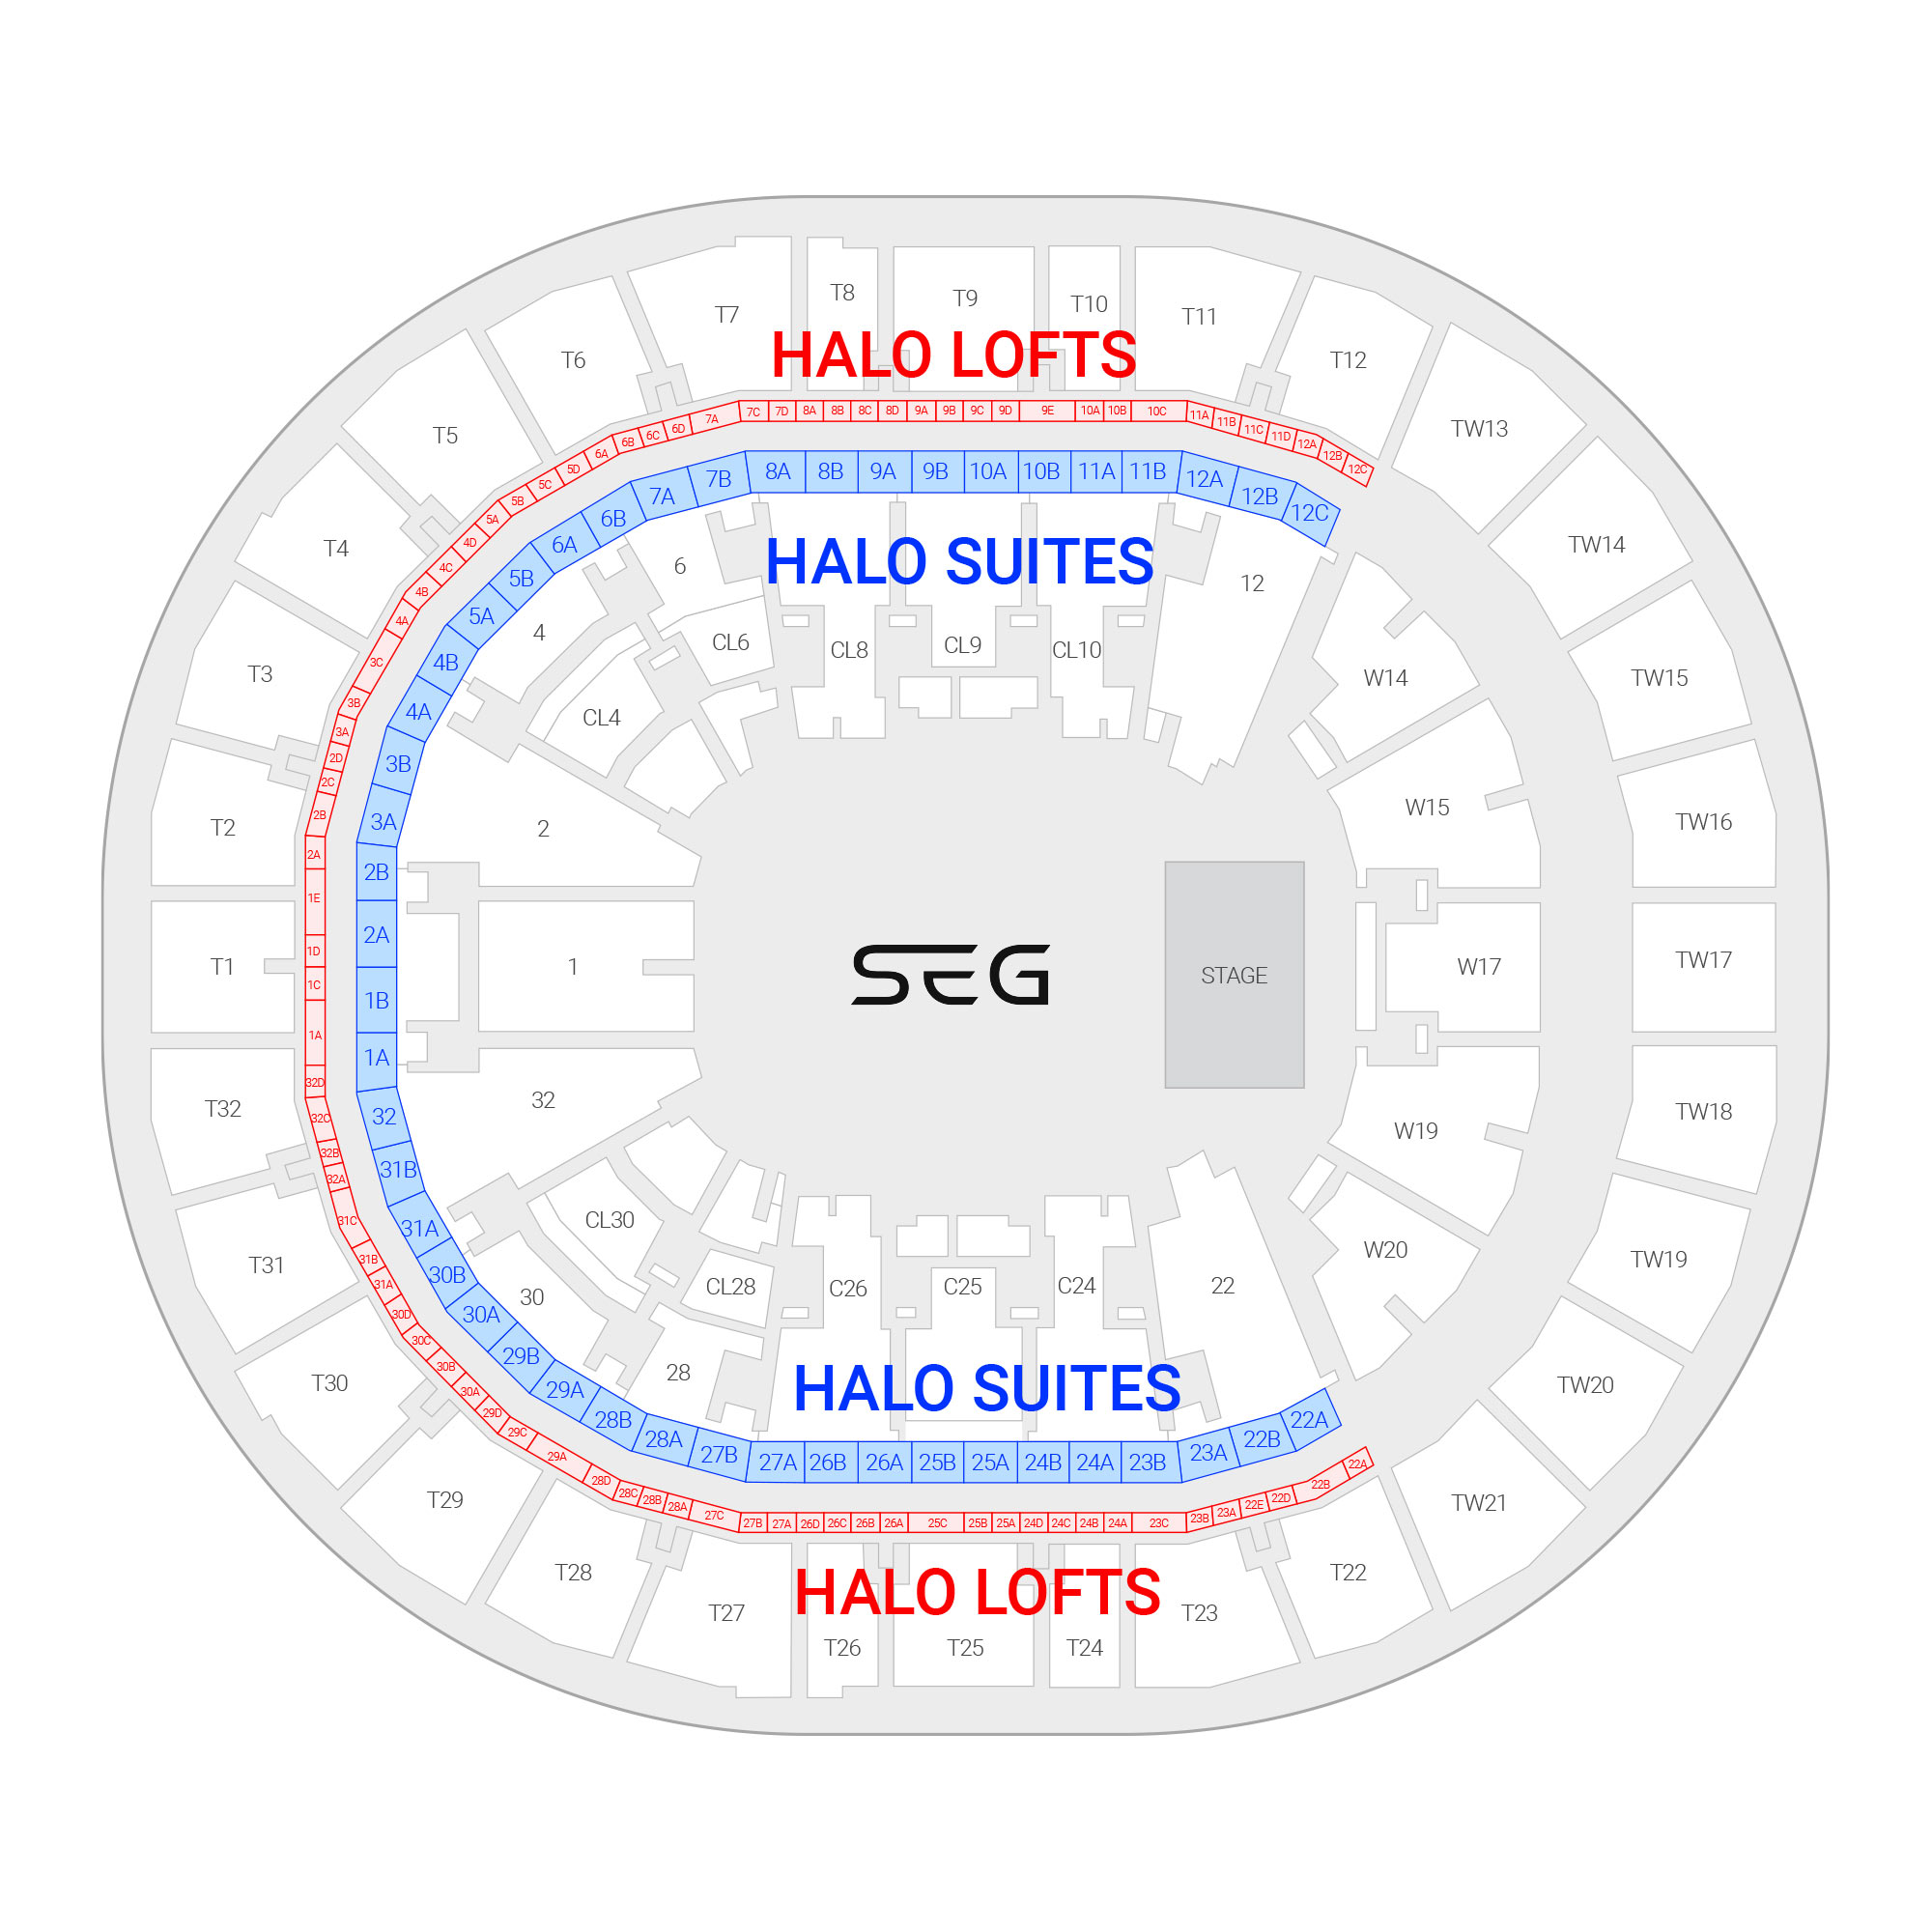 Intuit Dome / LA Clippers Suite Map and Seating Chart